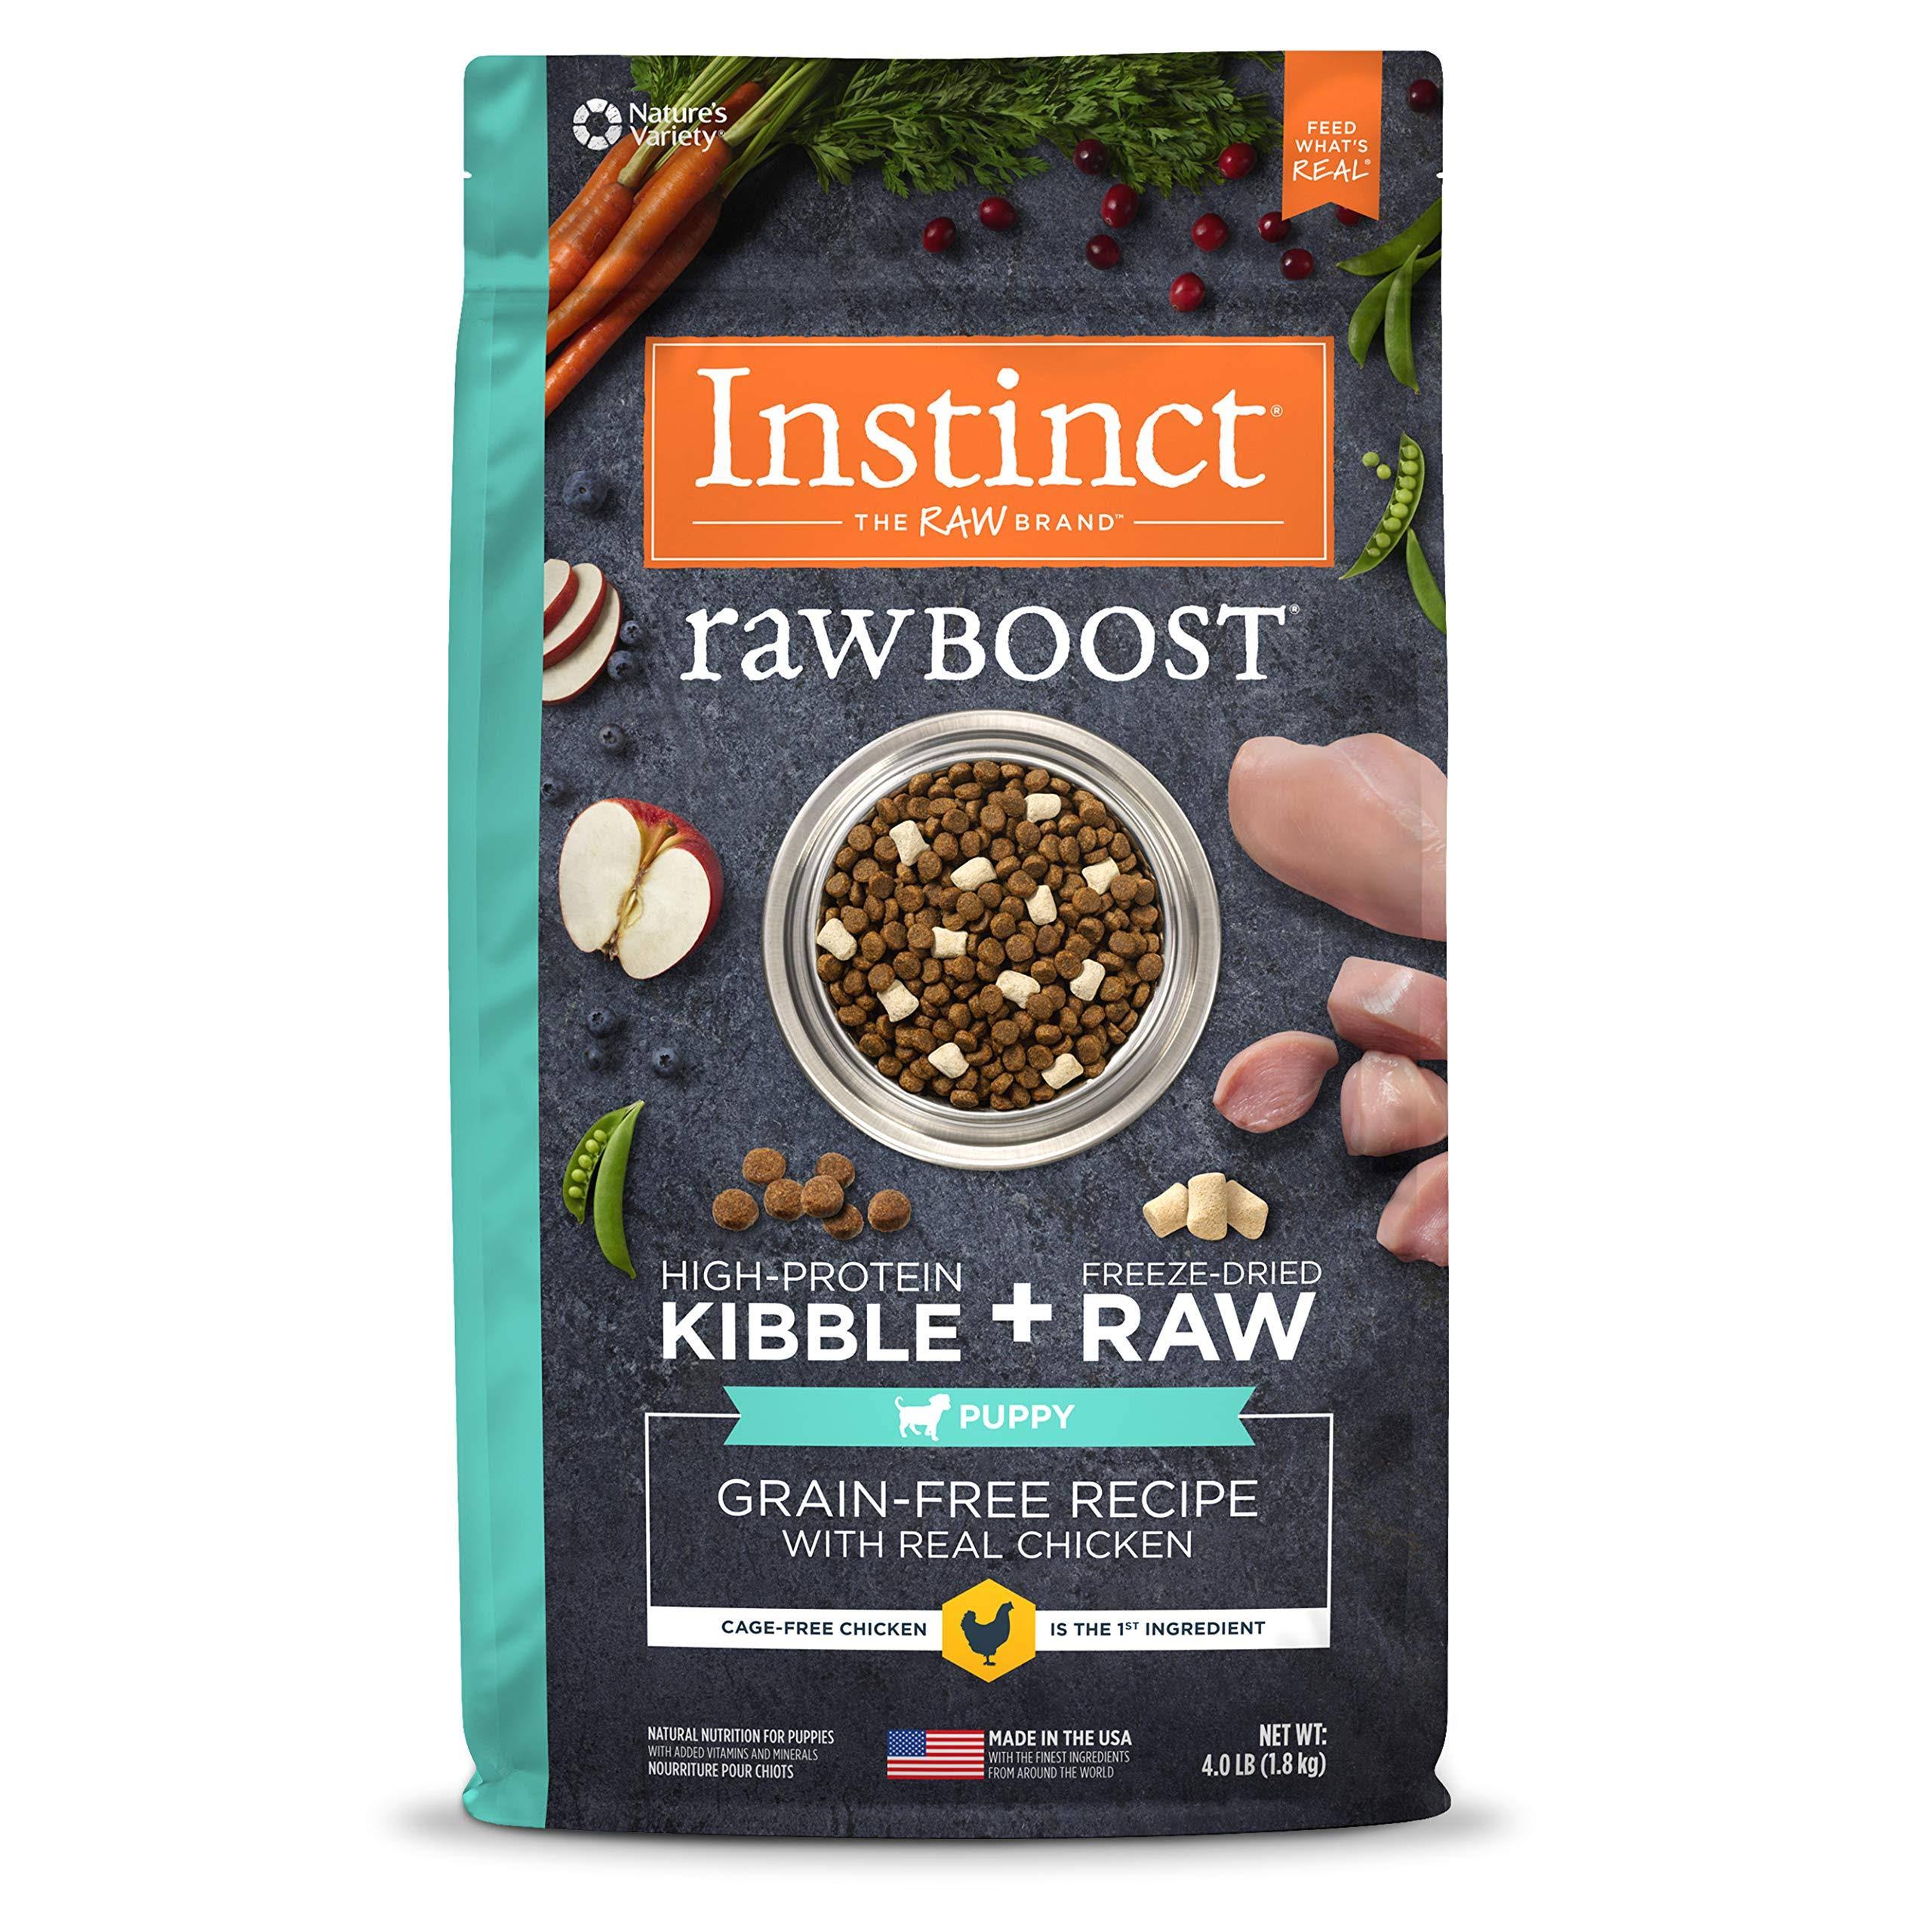 Nature's Variety Instinct Raw Boost Puppy Grain Free Recipe Dry Dog Food - with Real Chicken, 4lbs